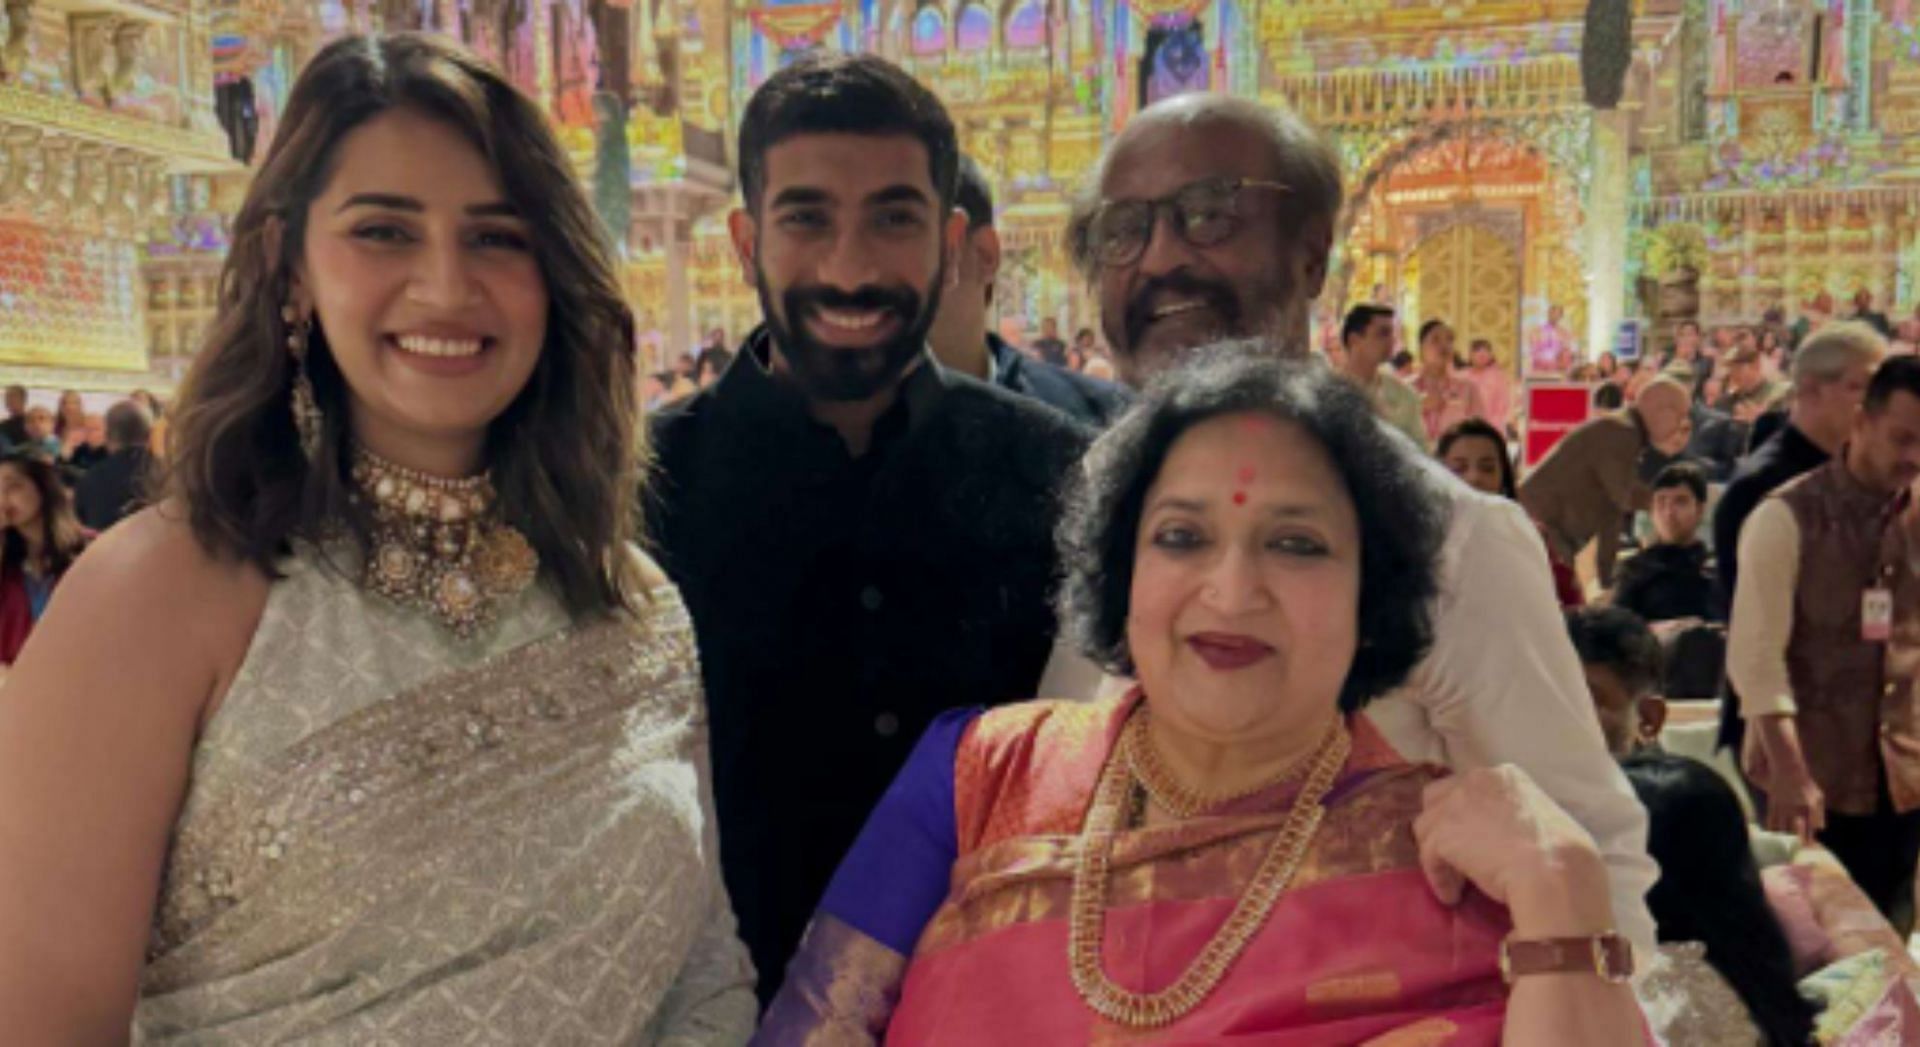 “So glad I had the opportunity” – Jasprit Bumrah shares fan moment with Rajinikanth